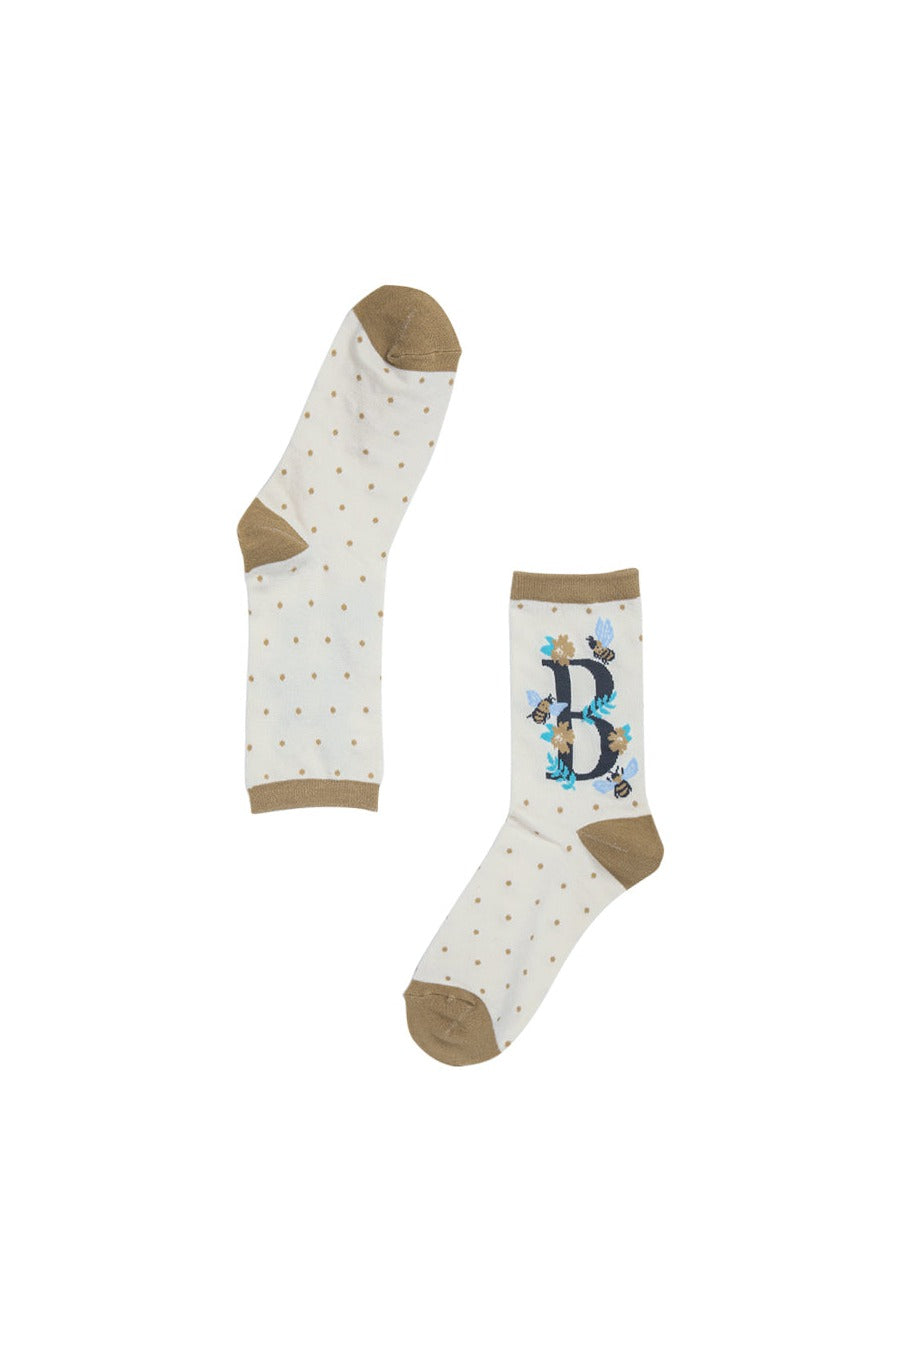 cream bamboo ankle socks with the initial B